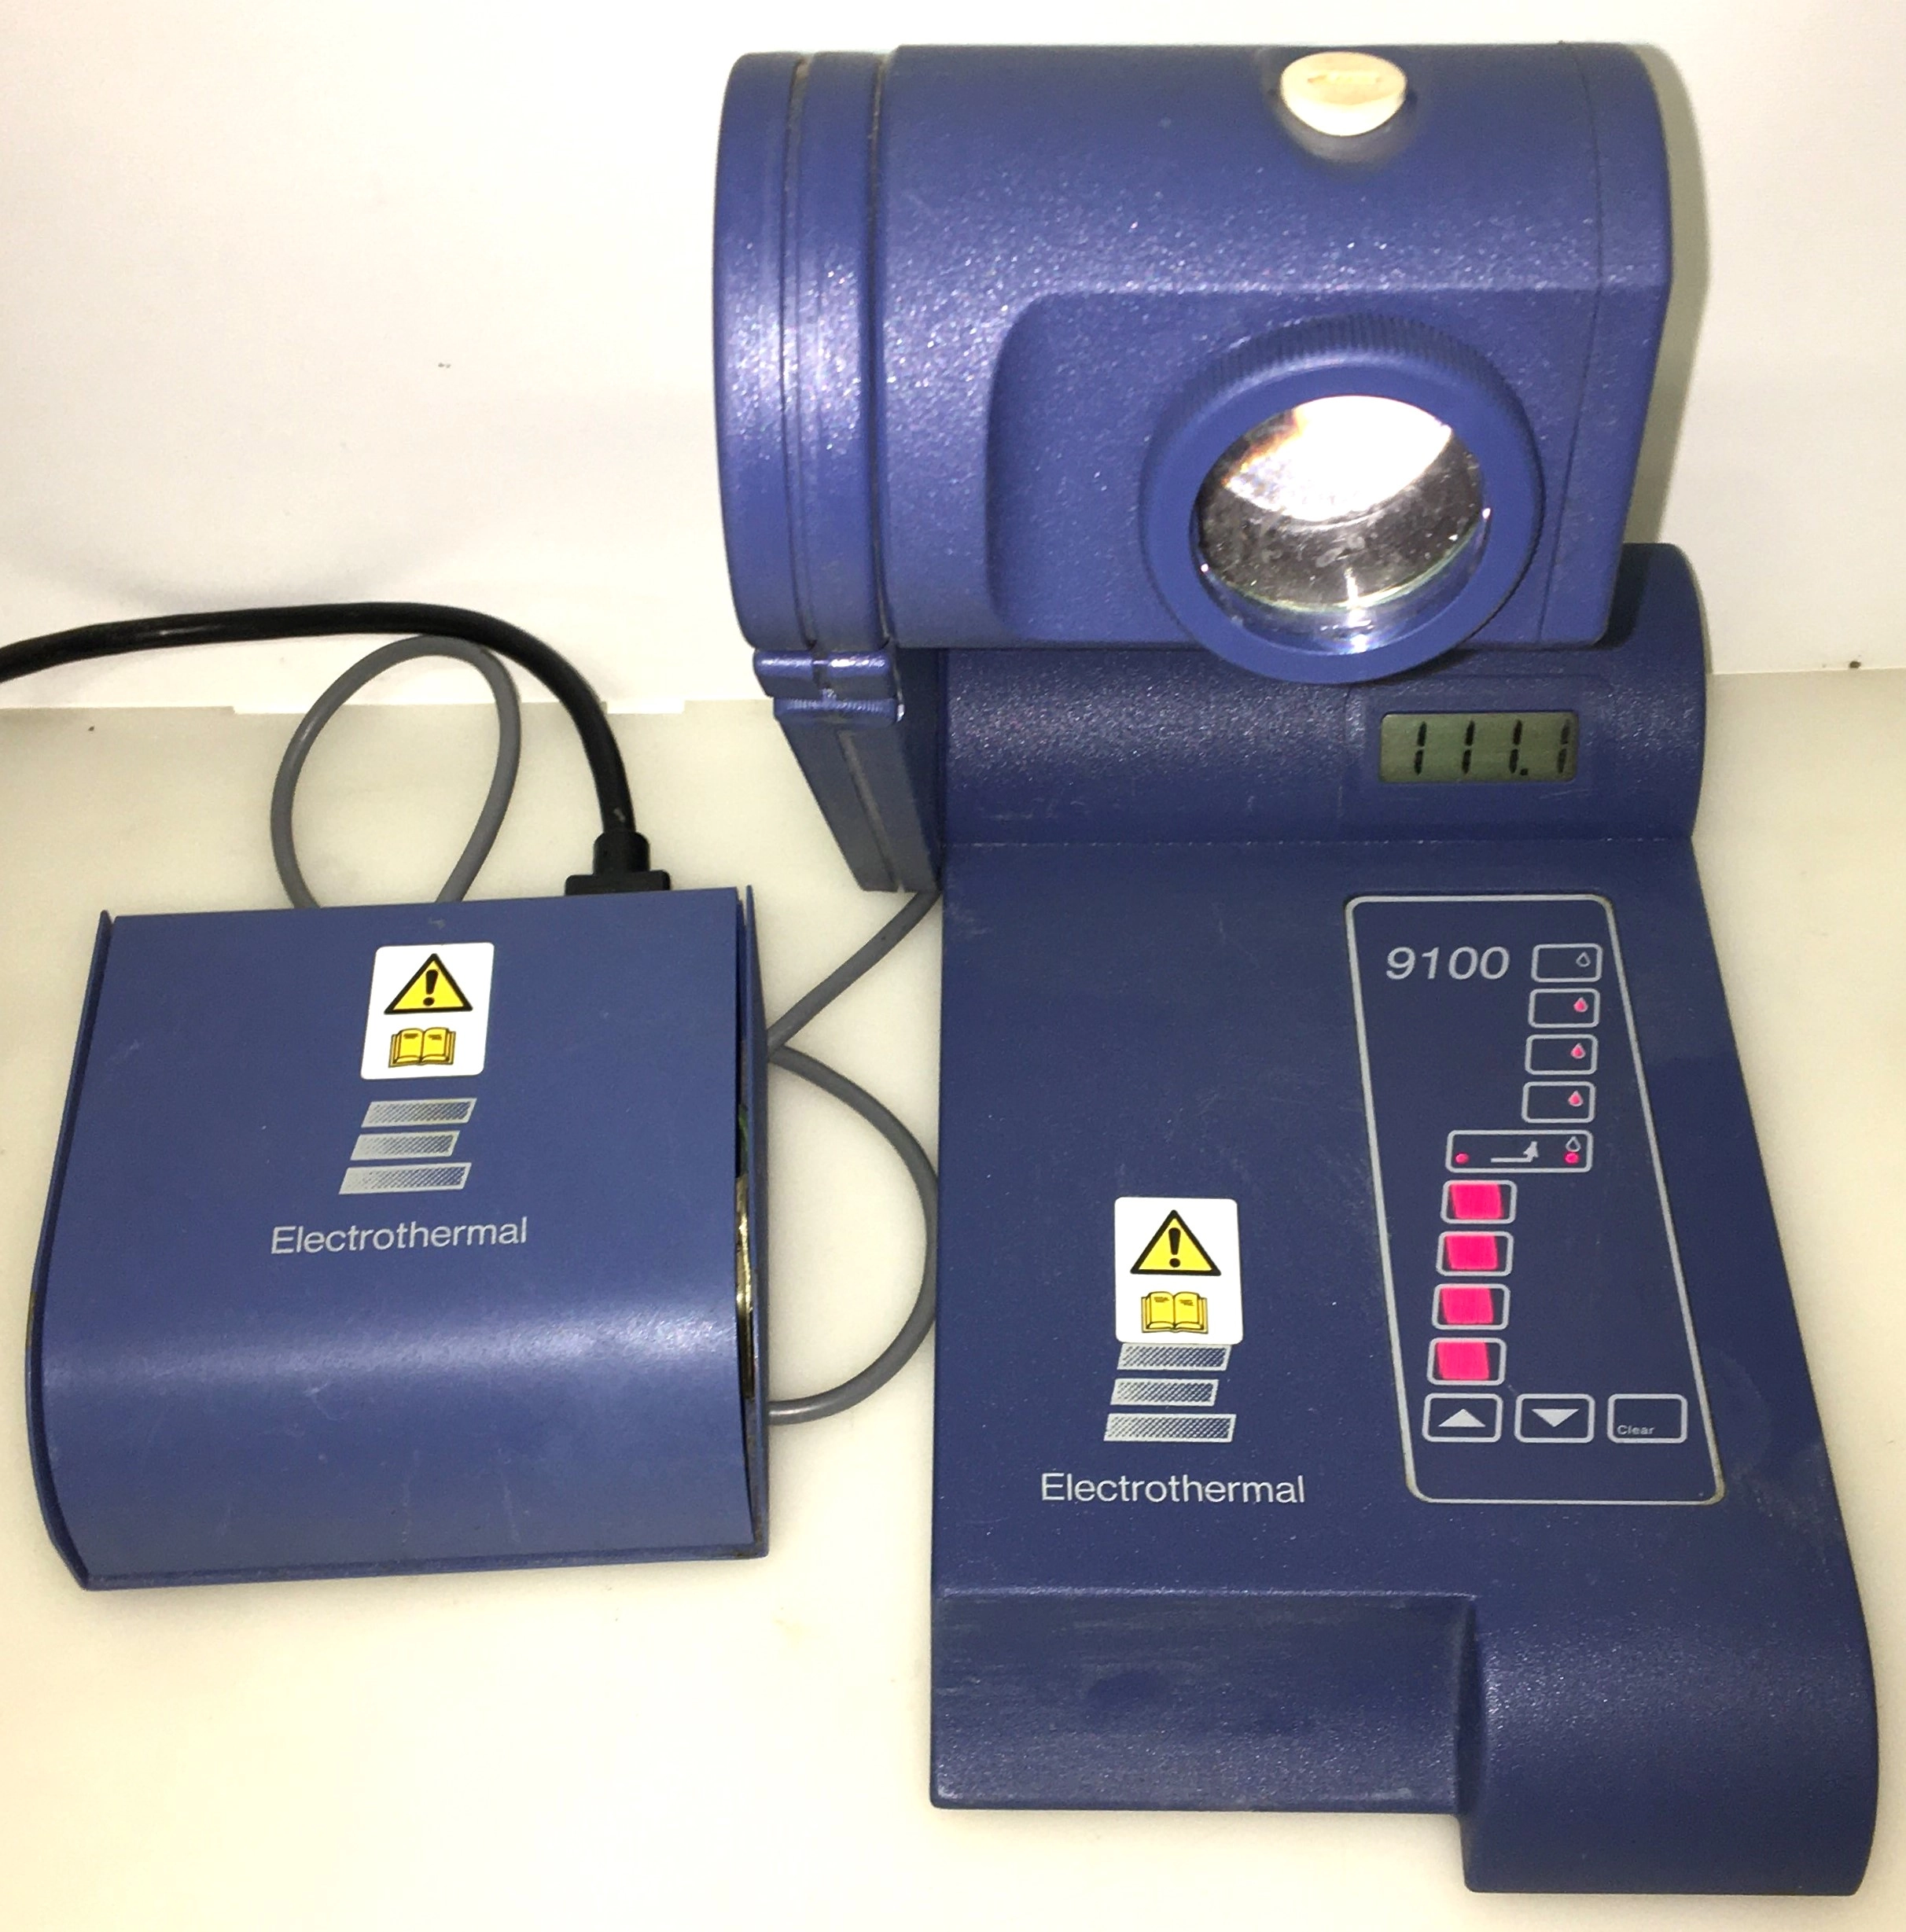 Electrothermal IA9100 MK1 Melting-Point Apparatus with Power Supply